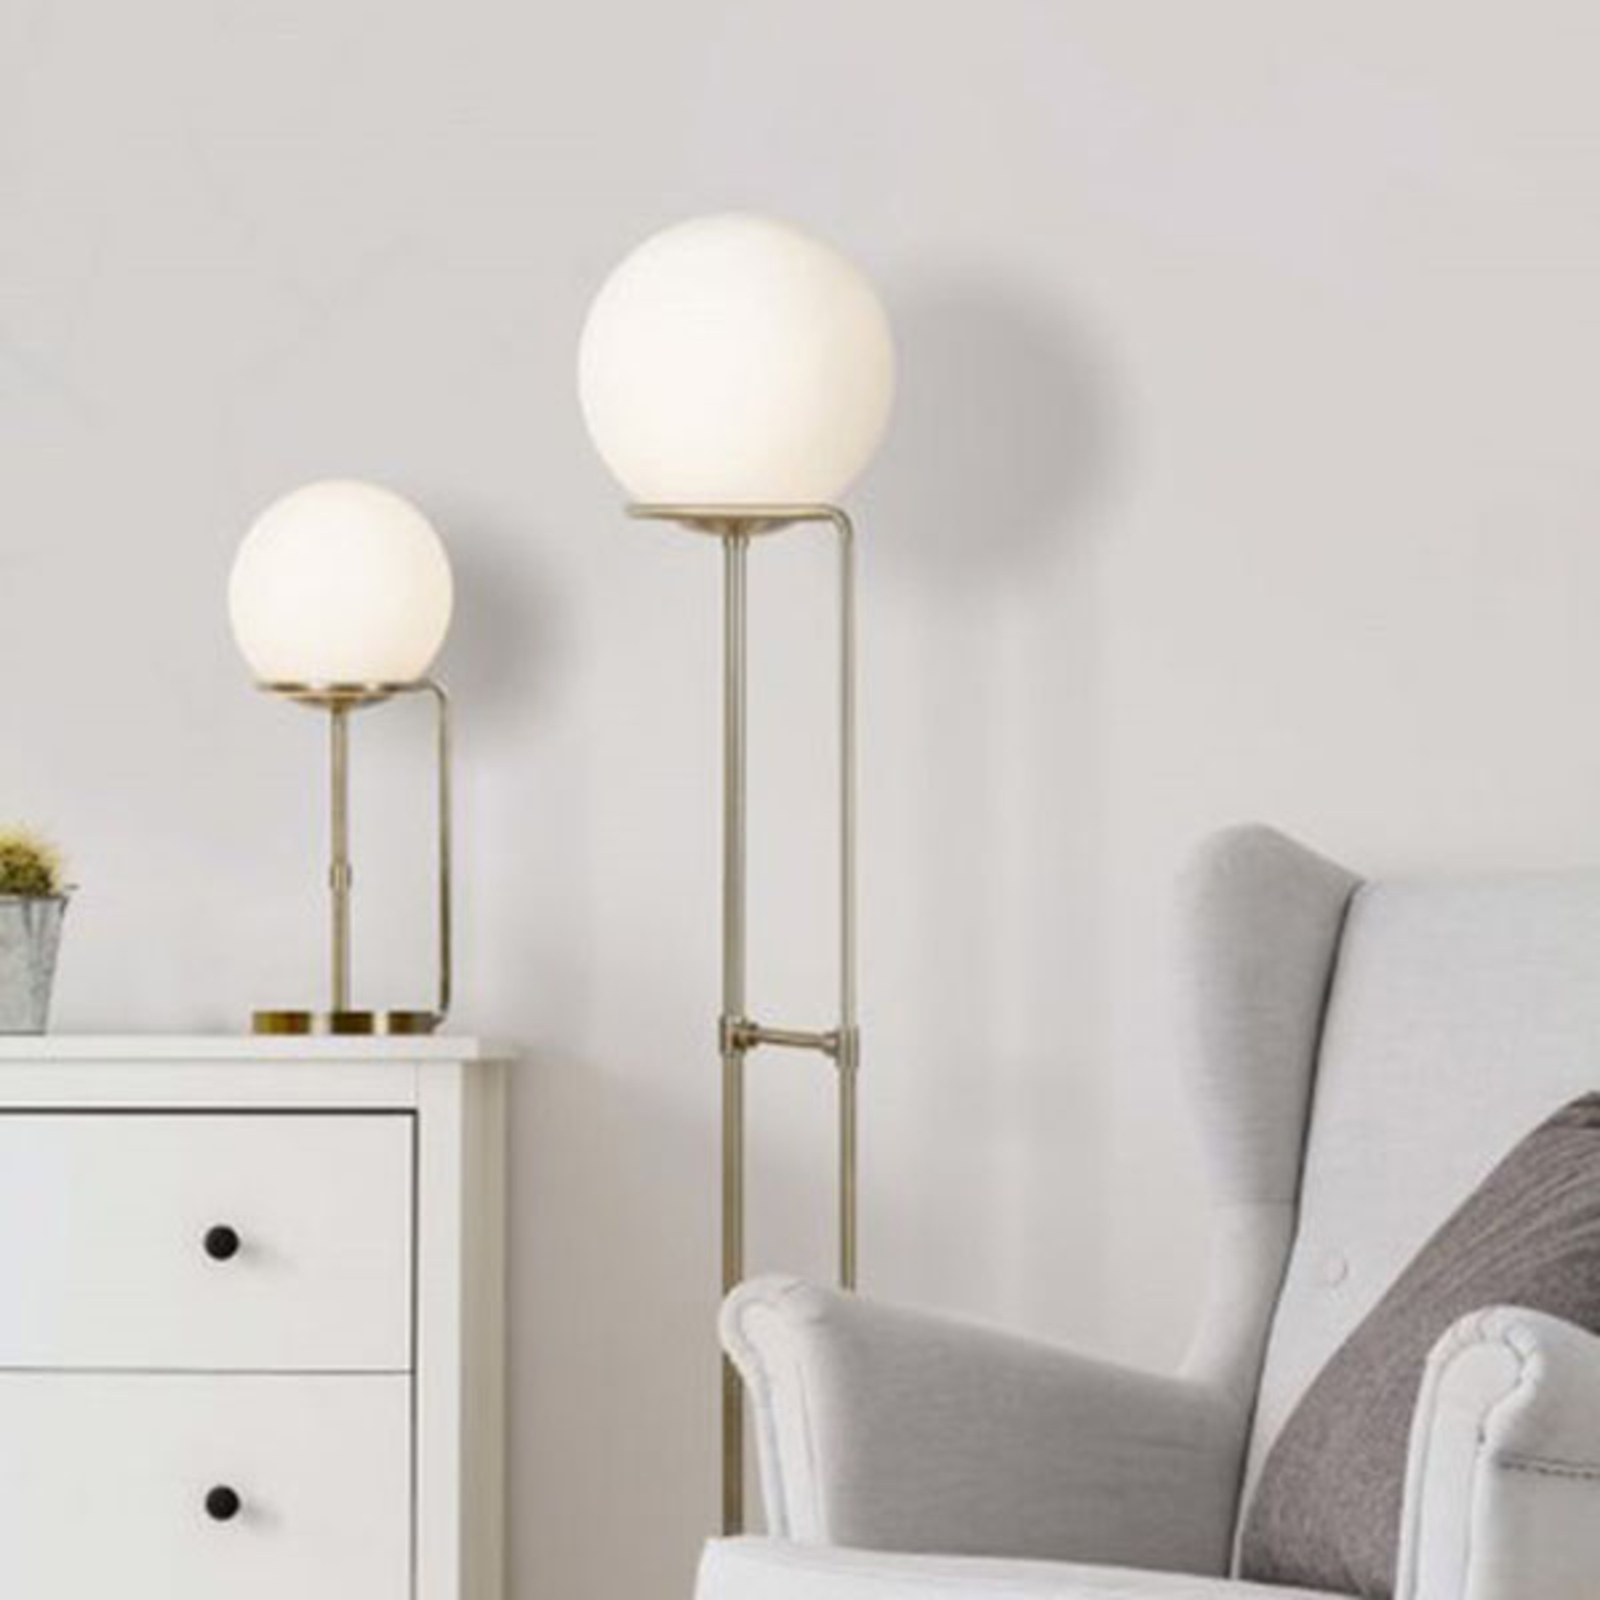 Sphere table lamp with a spherical glass lampshade